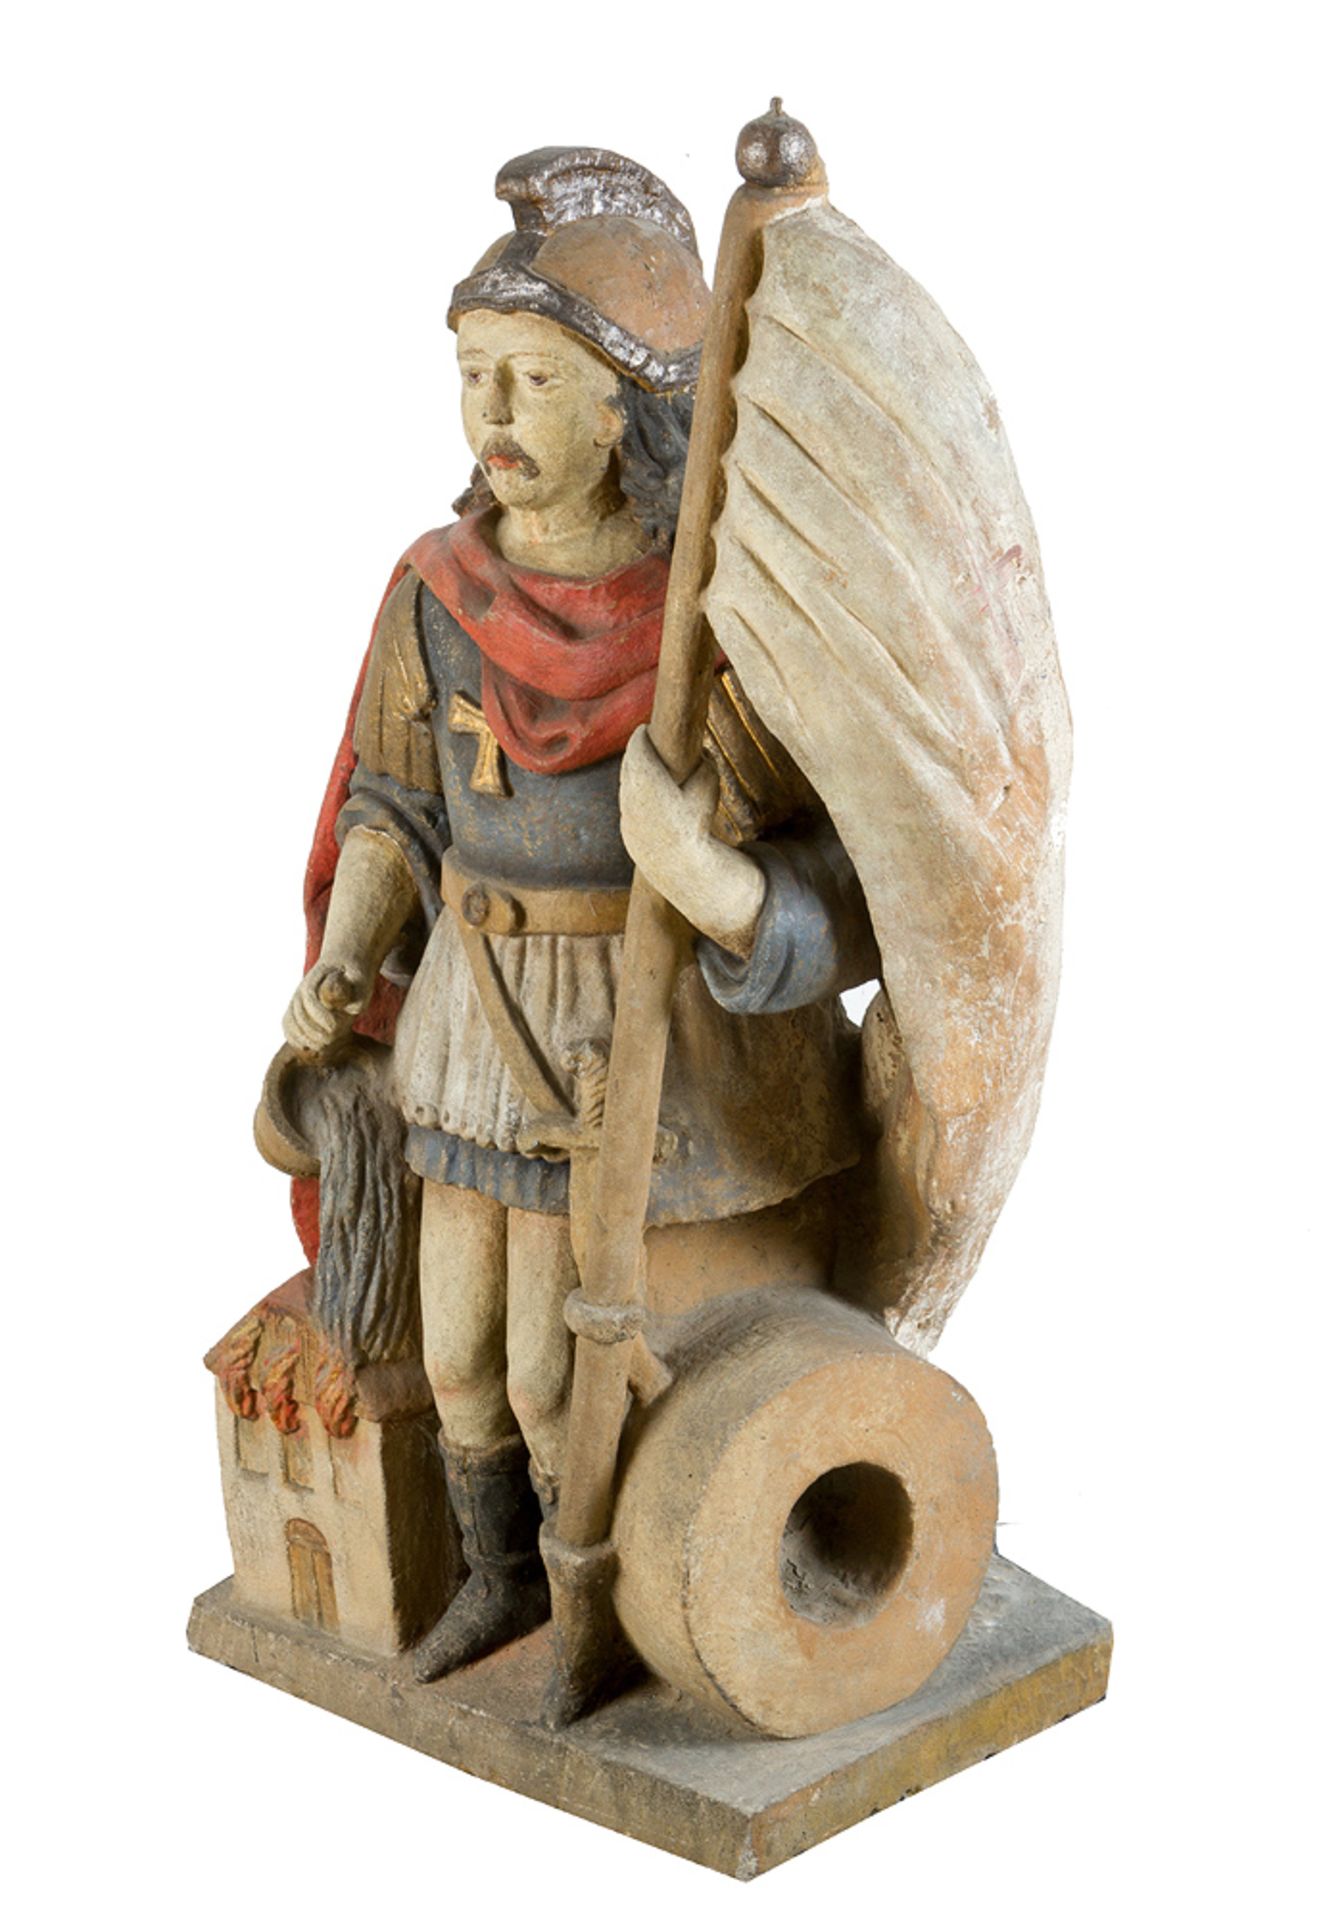 Sculpture of St Florian, protector of homes - Image 3 of 3